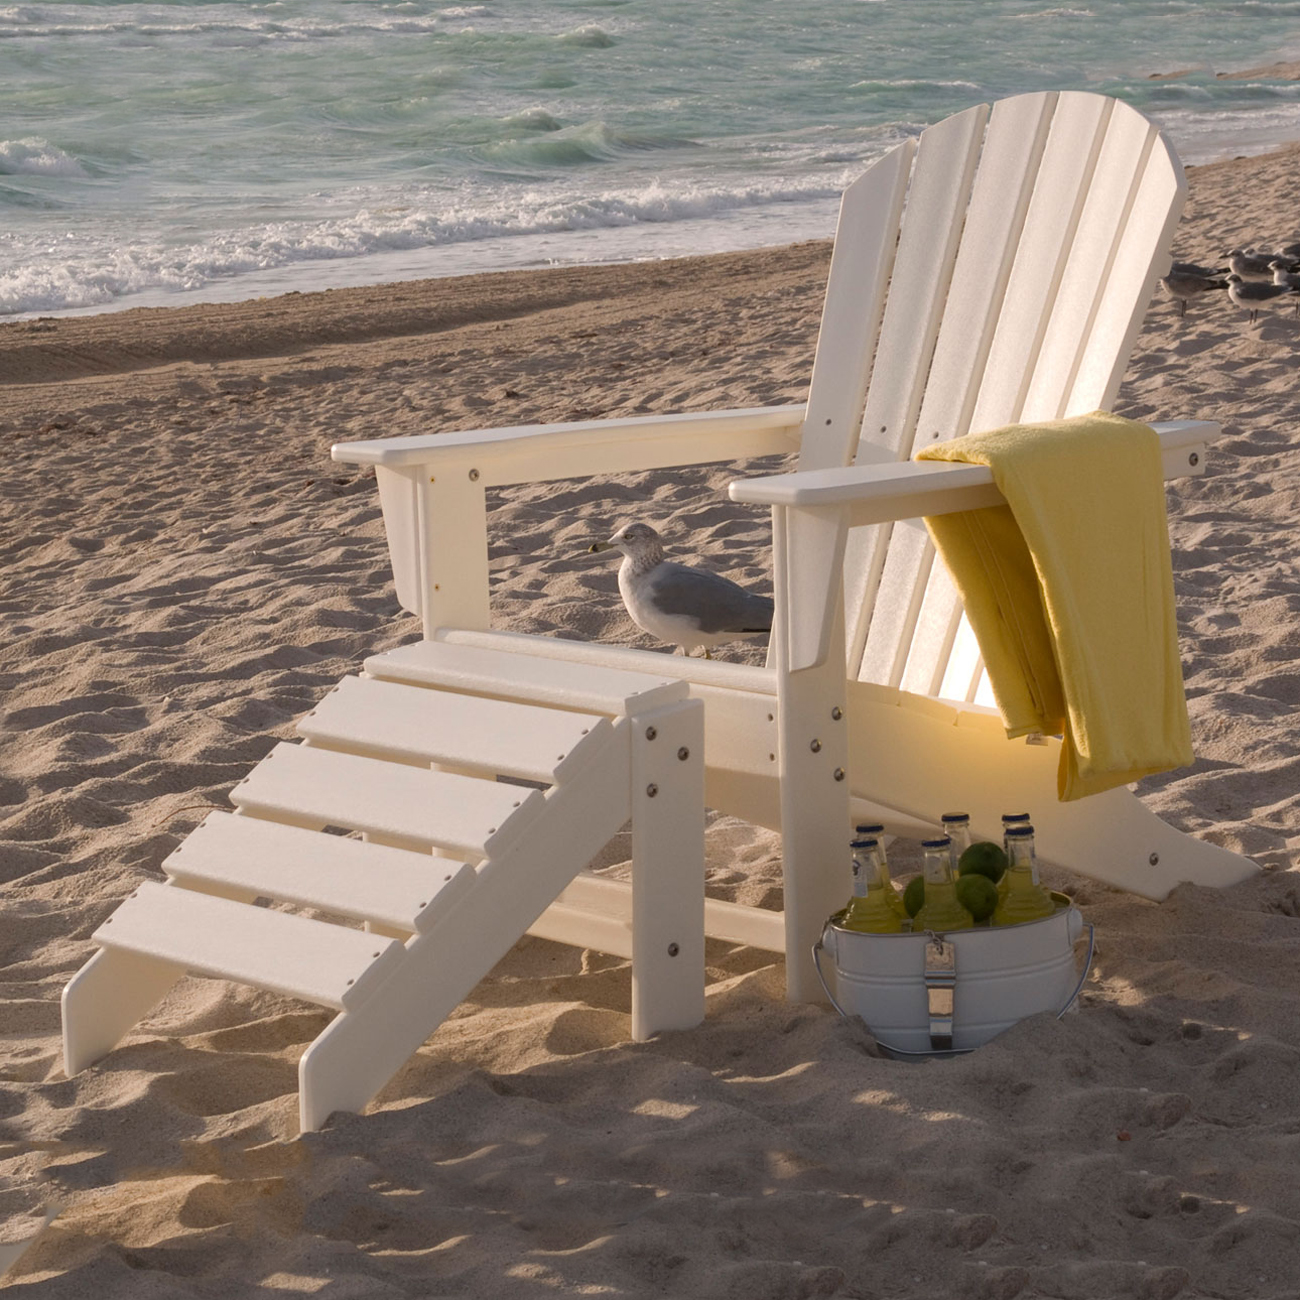 Albums 104+ Background Images Images Of Adirondack Chairs On The Beach ...